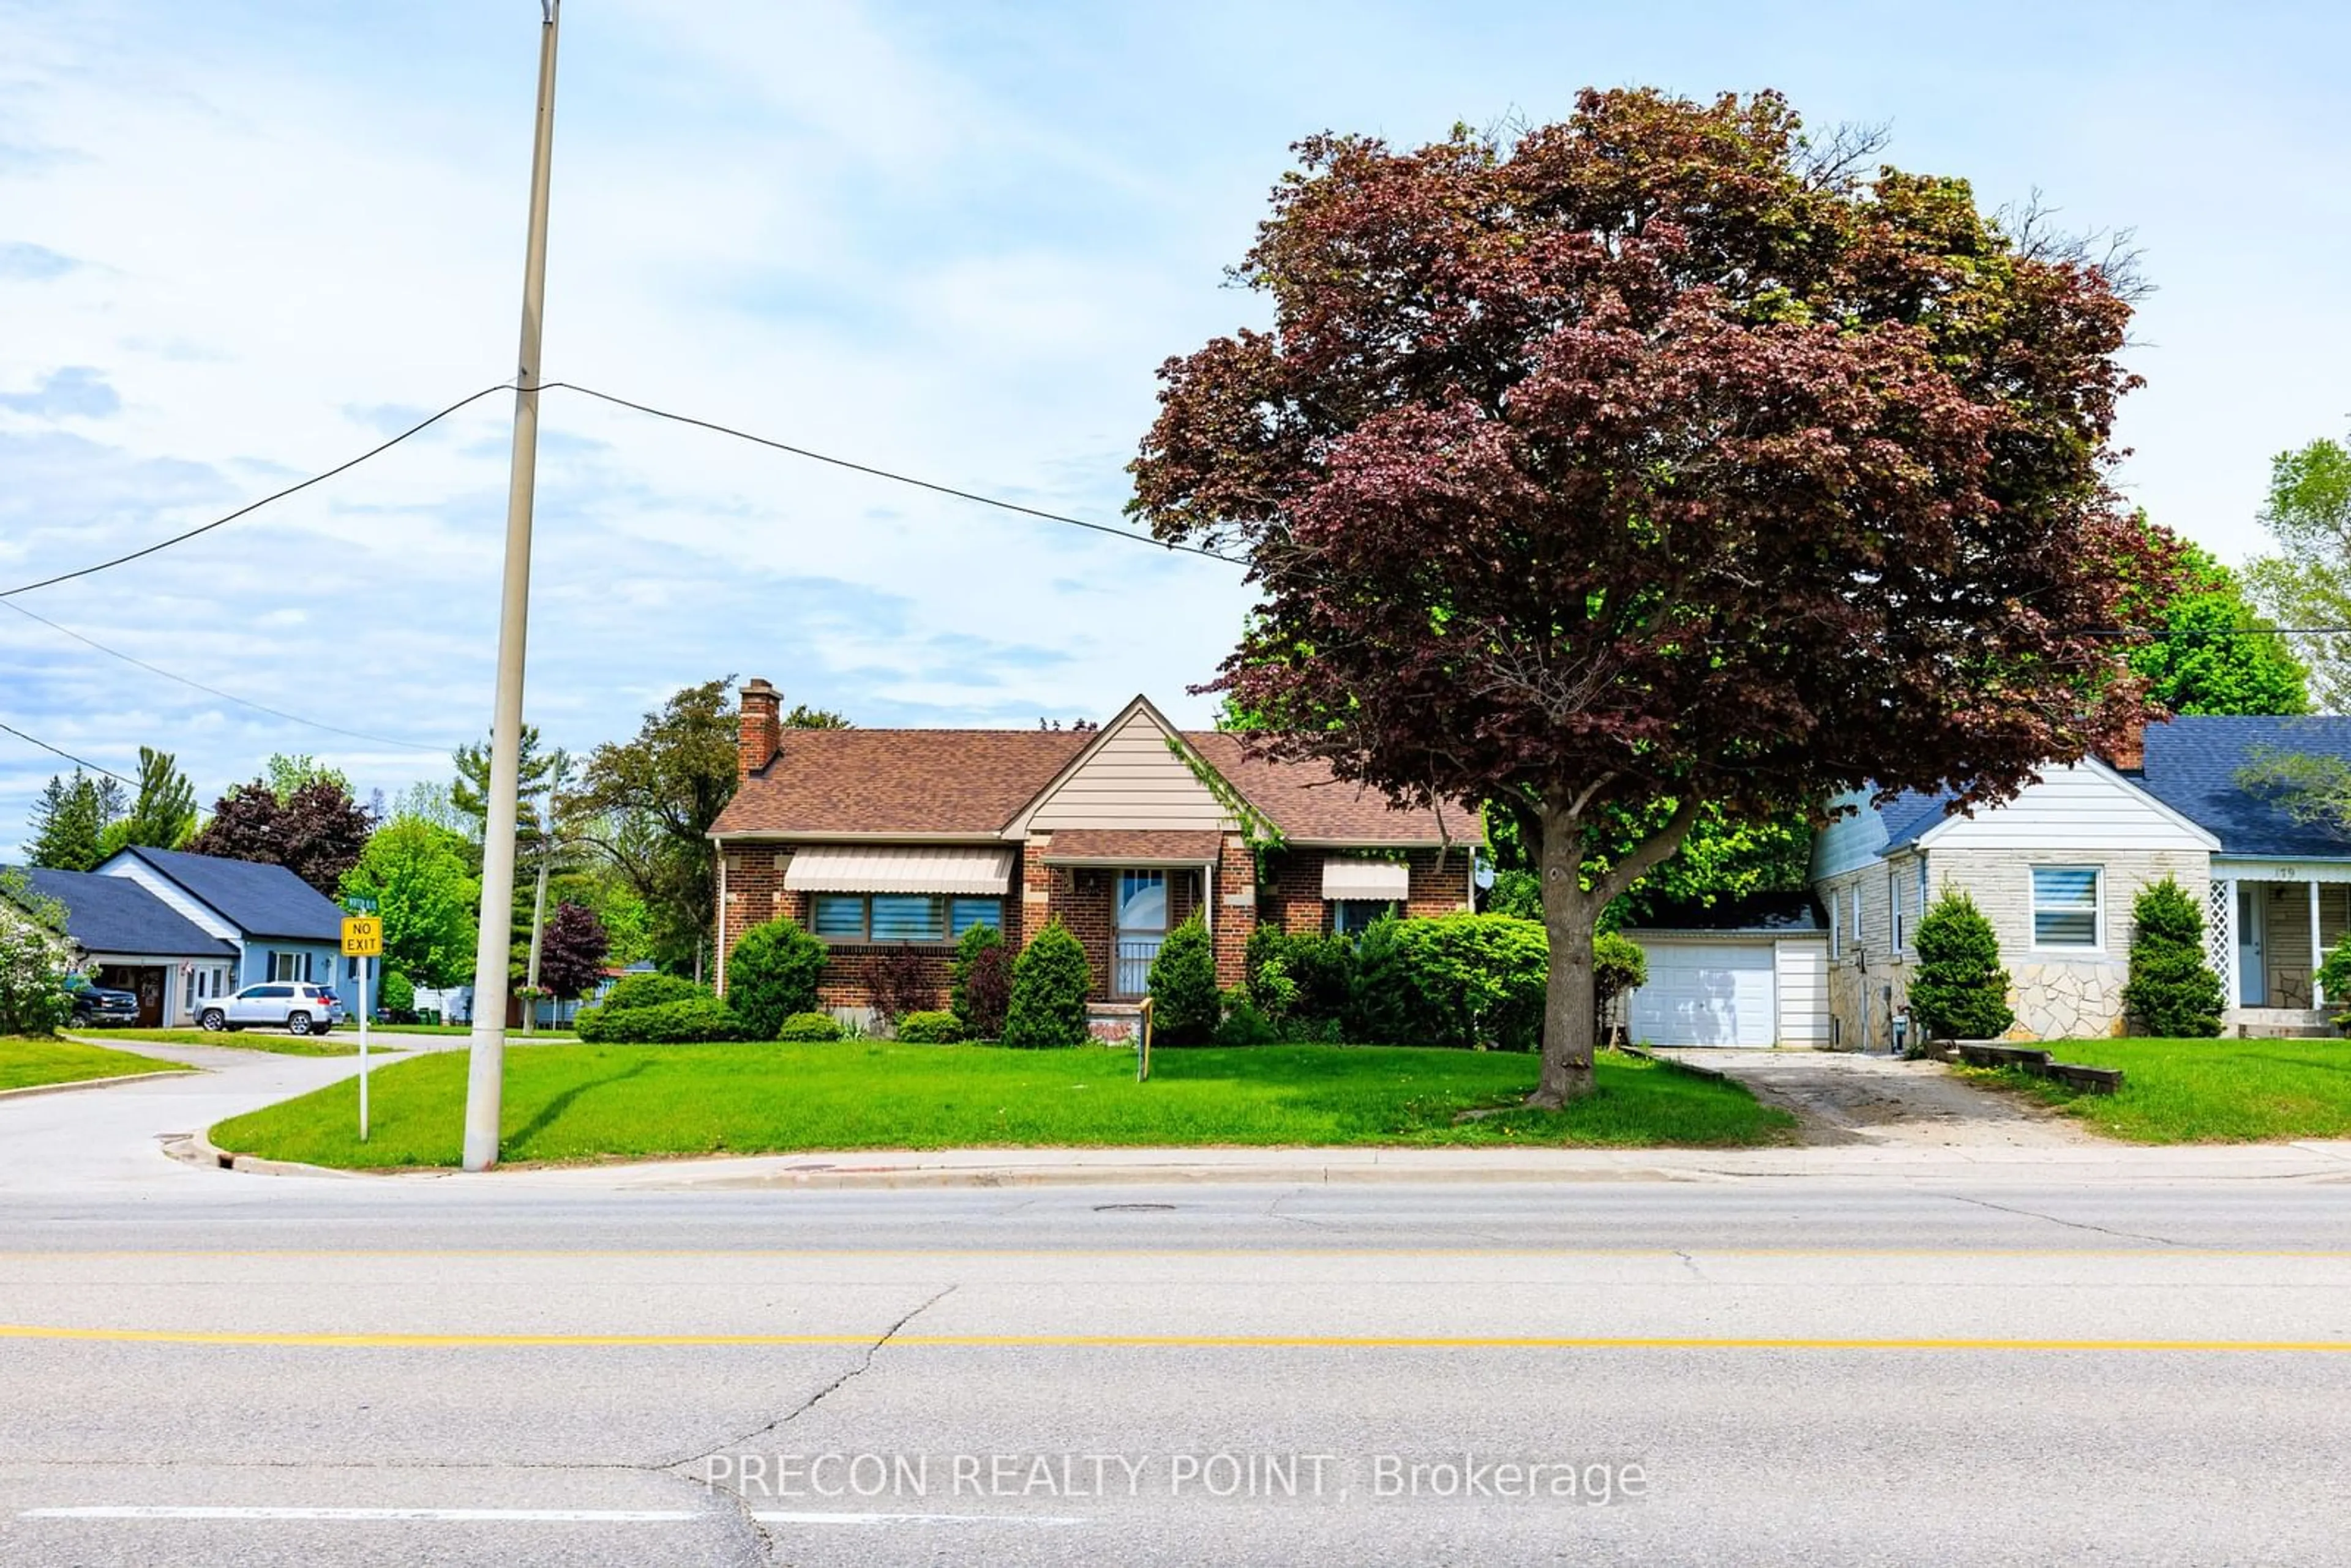 Street view for 173 Queen St, Caledon Ontario L7E 2C6